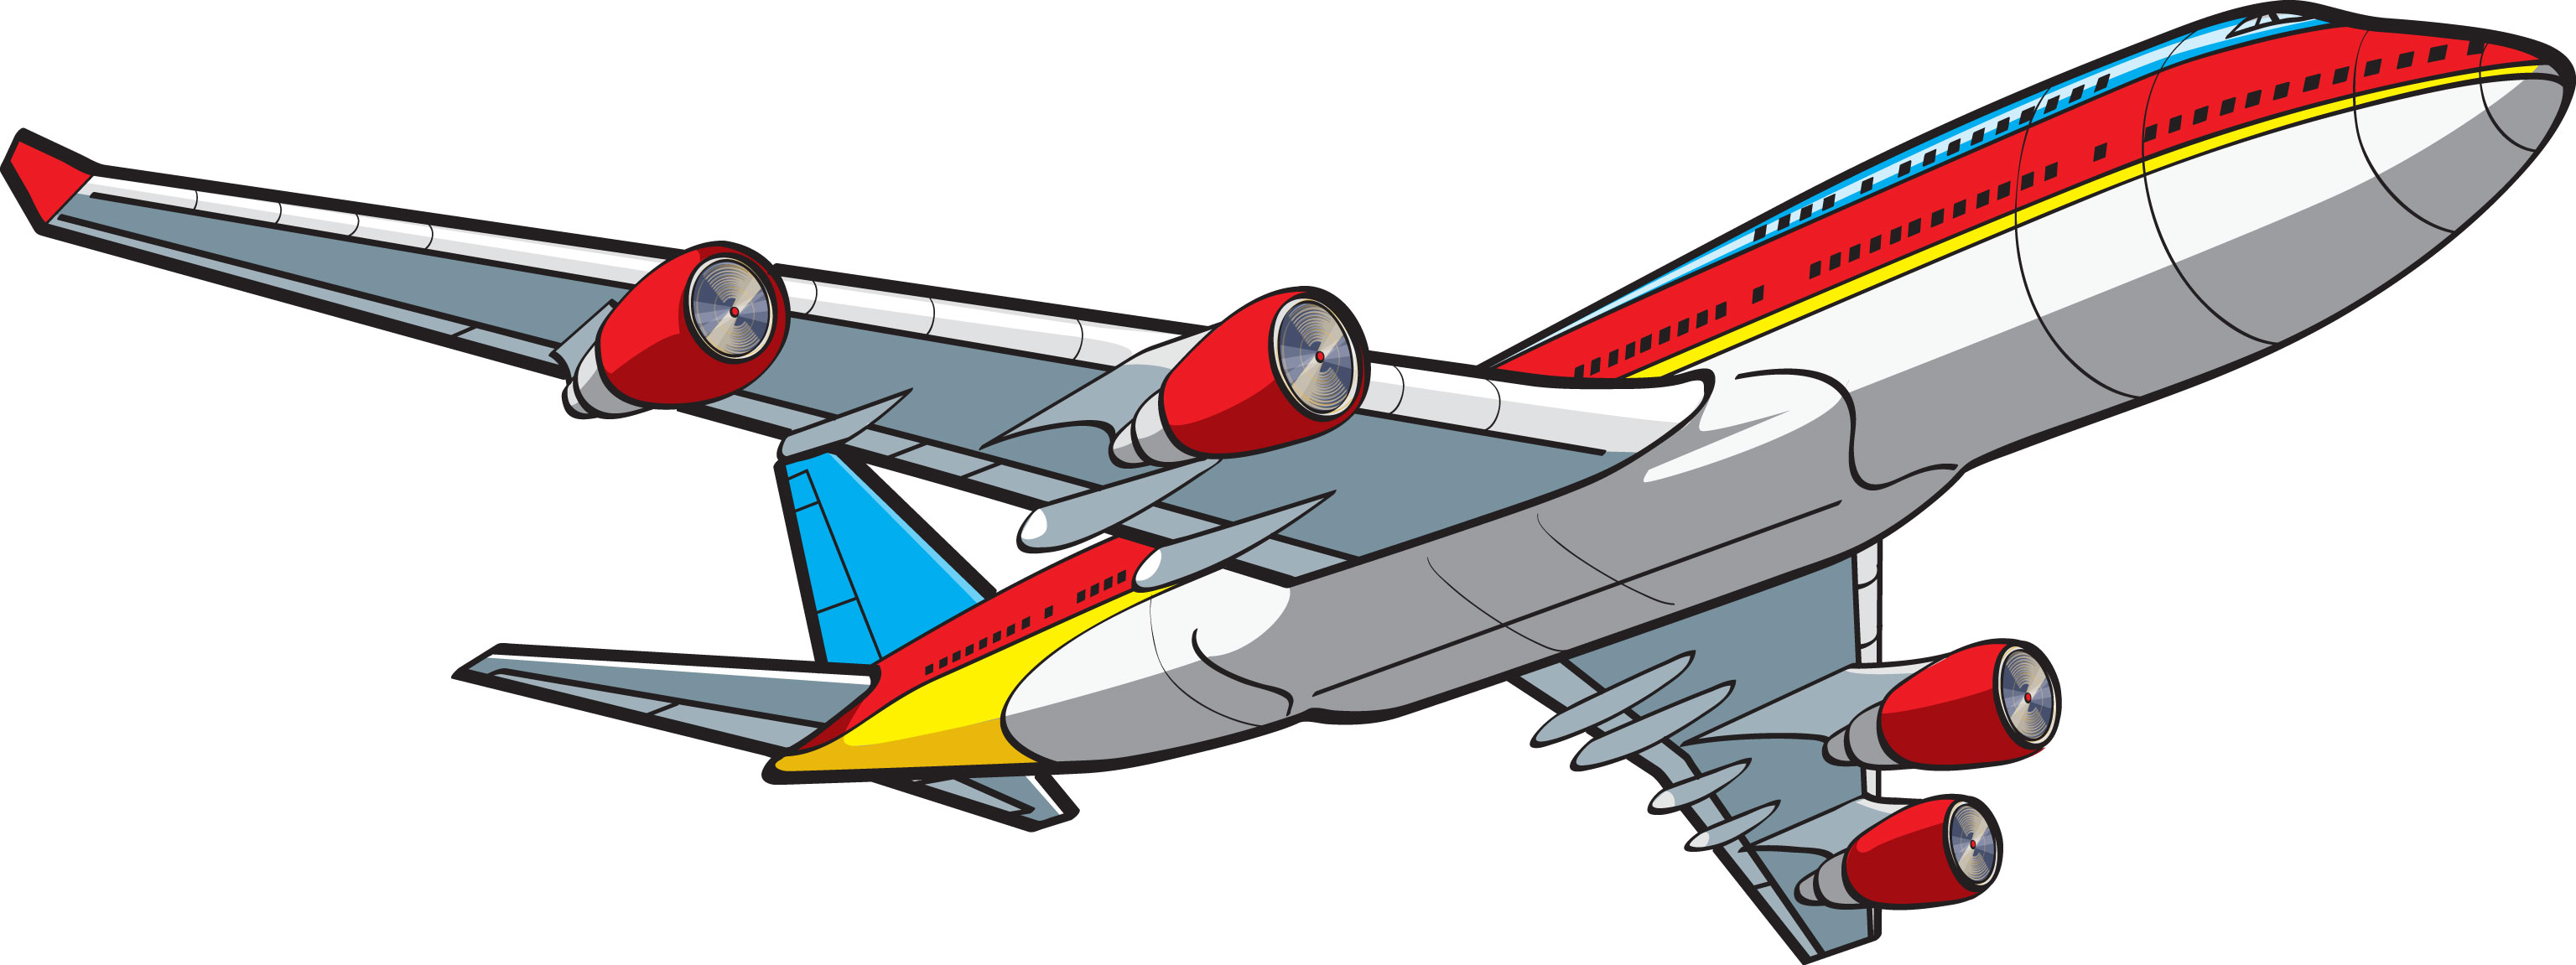 clipart for airplane - photo #47